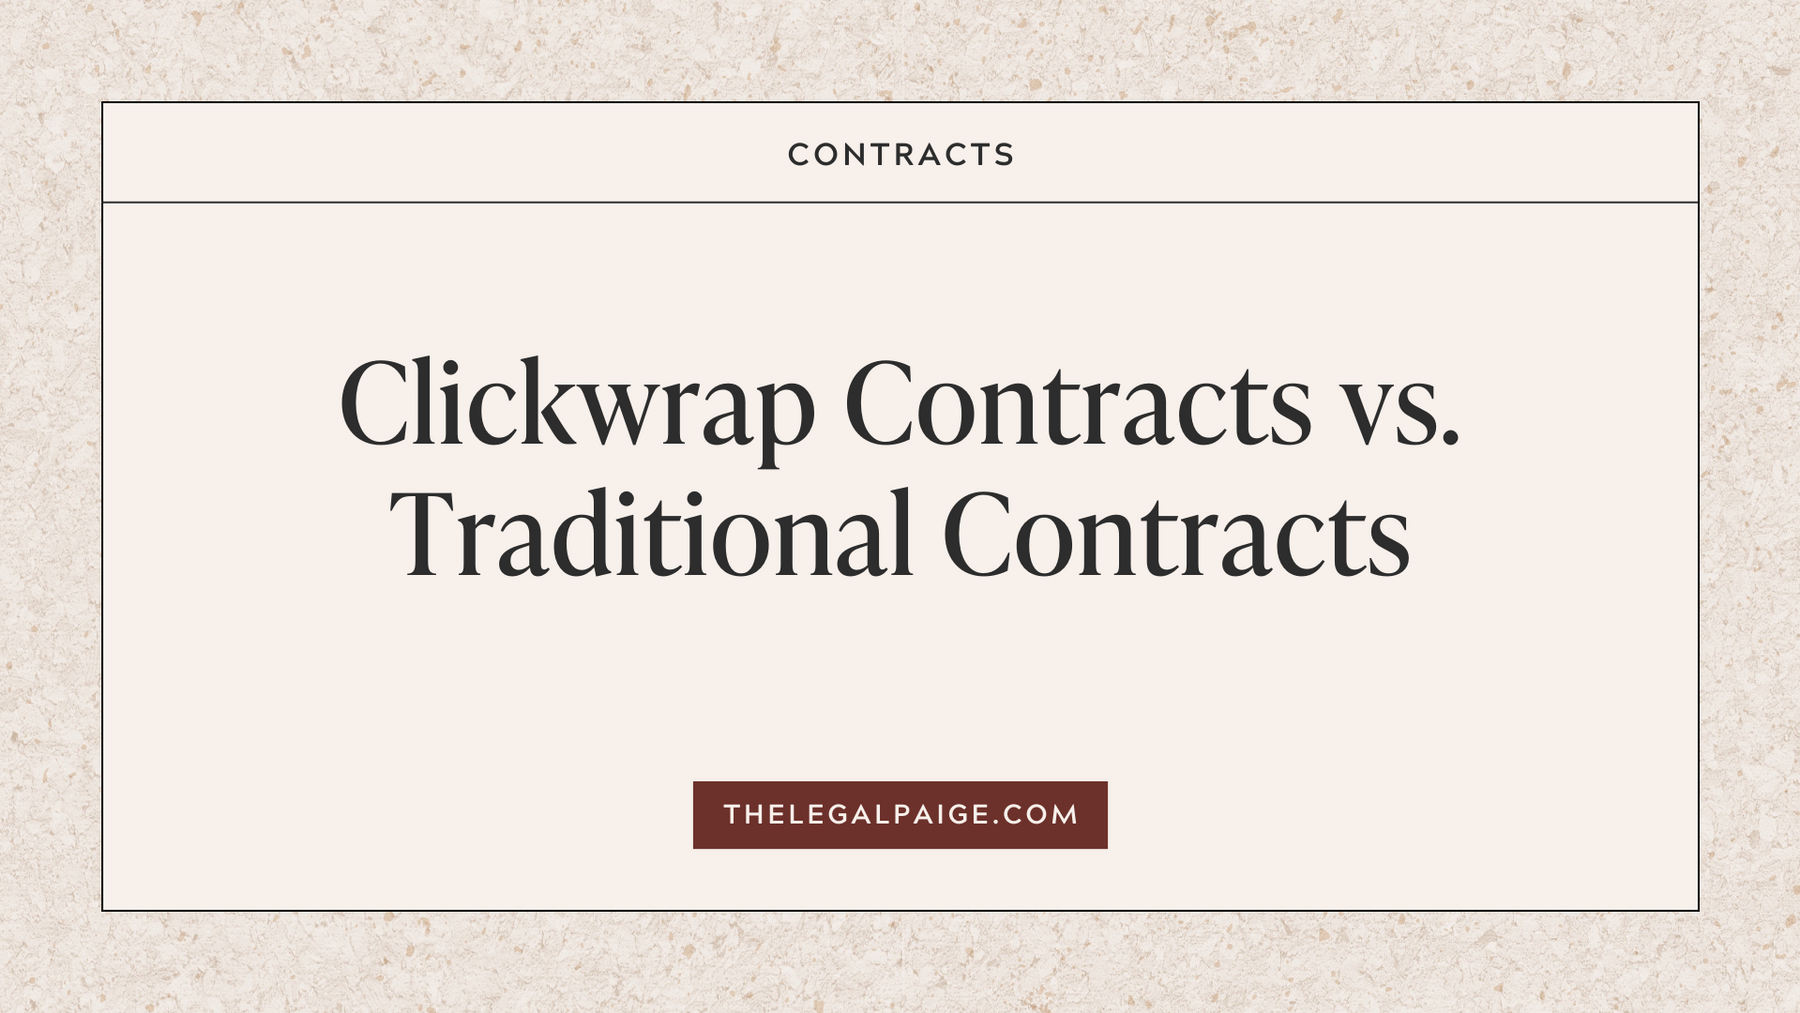 Clickwrap Contracts vs. Traditional Contracts